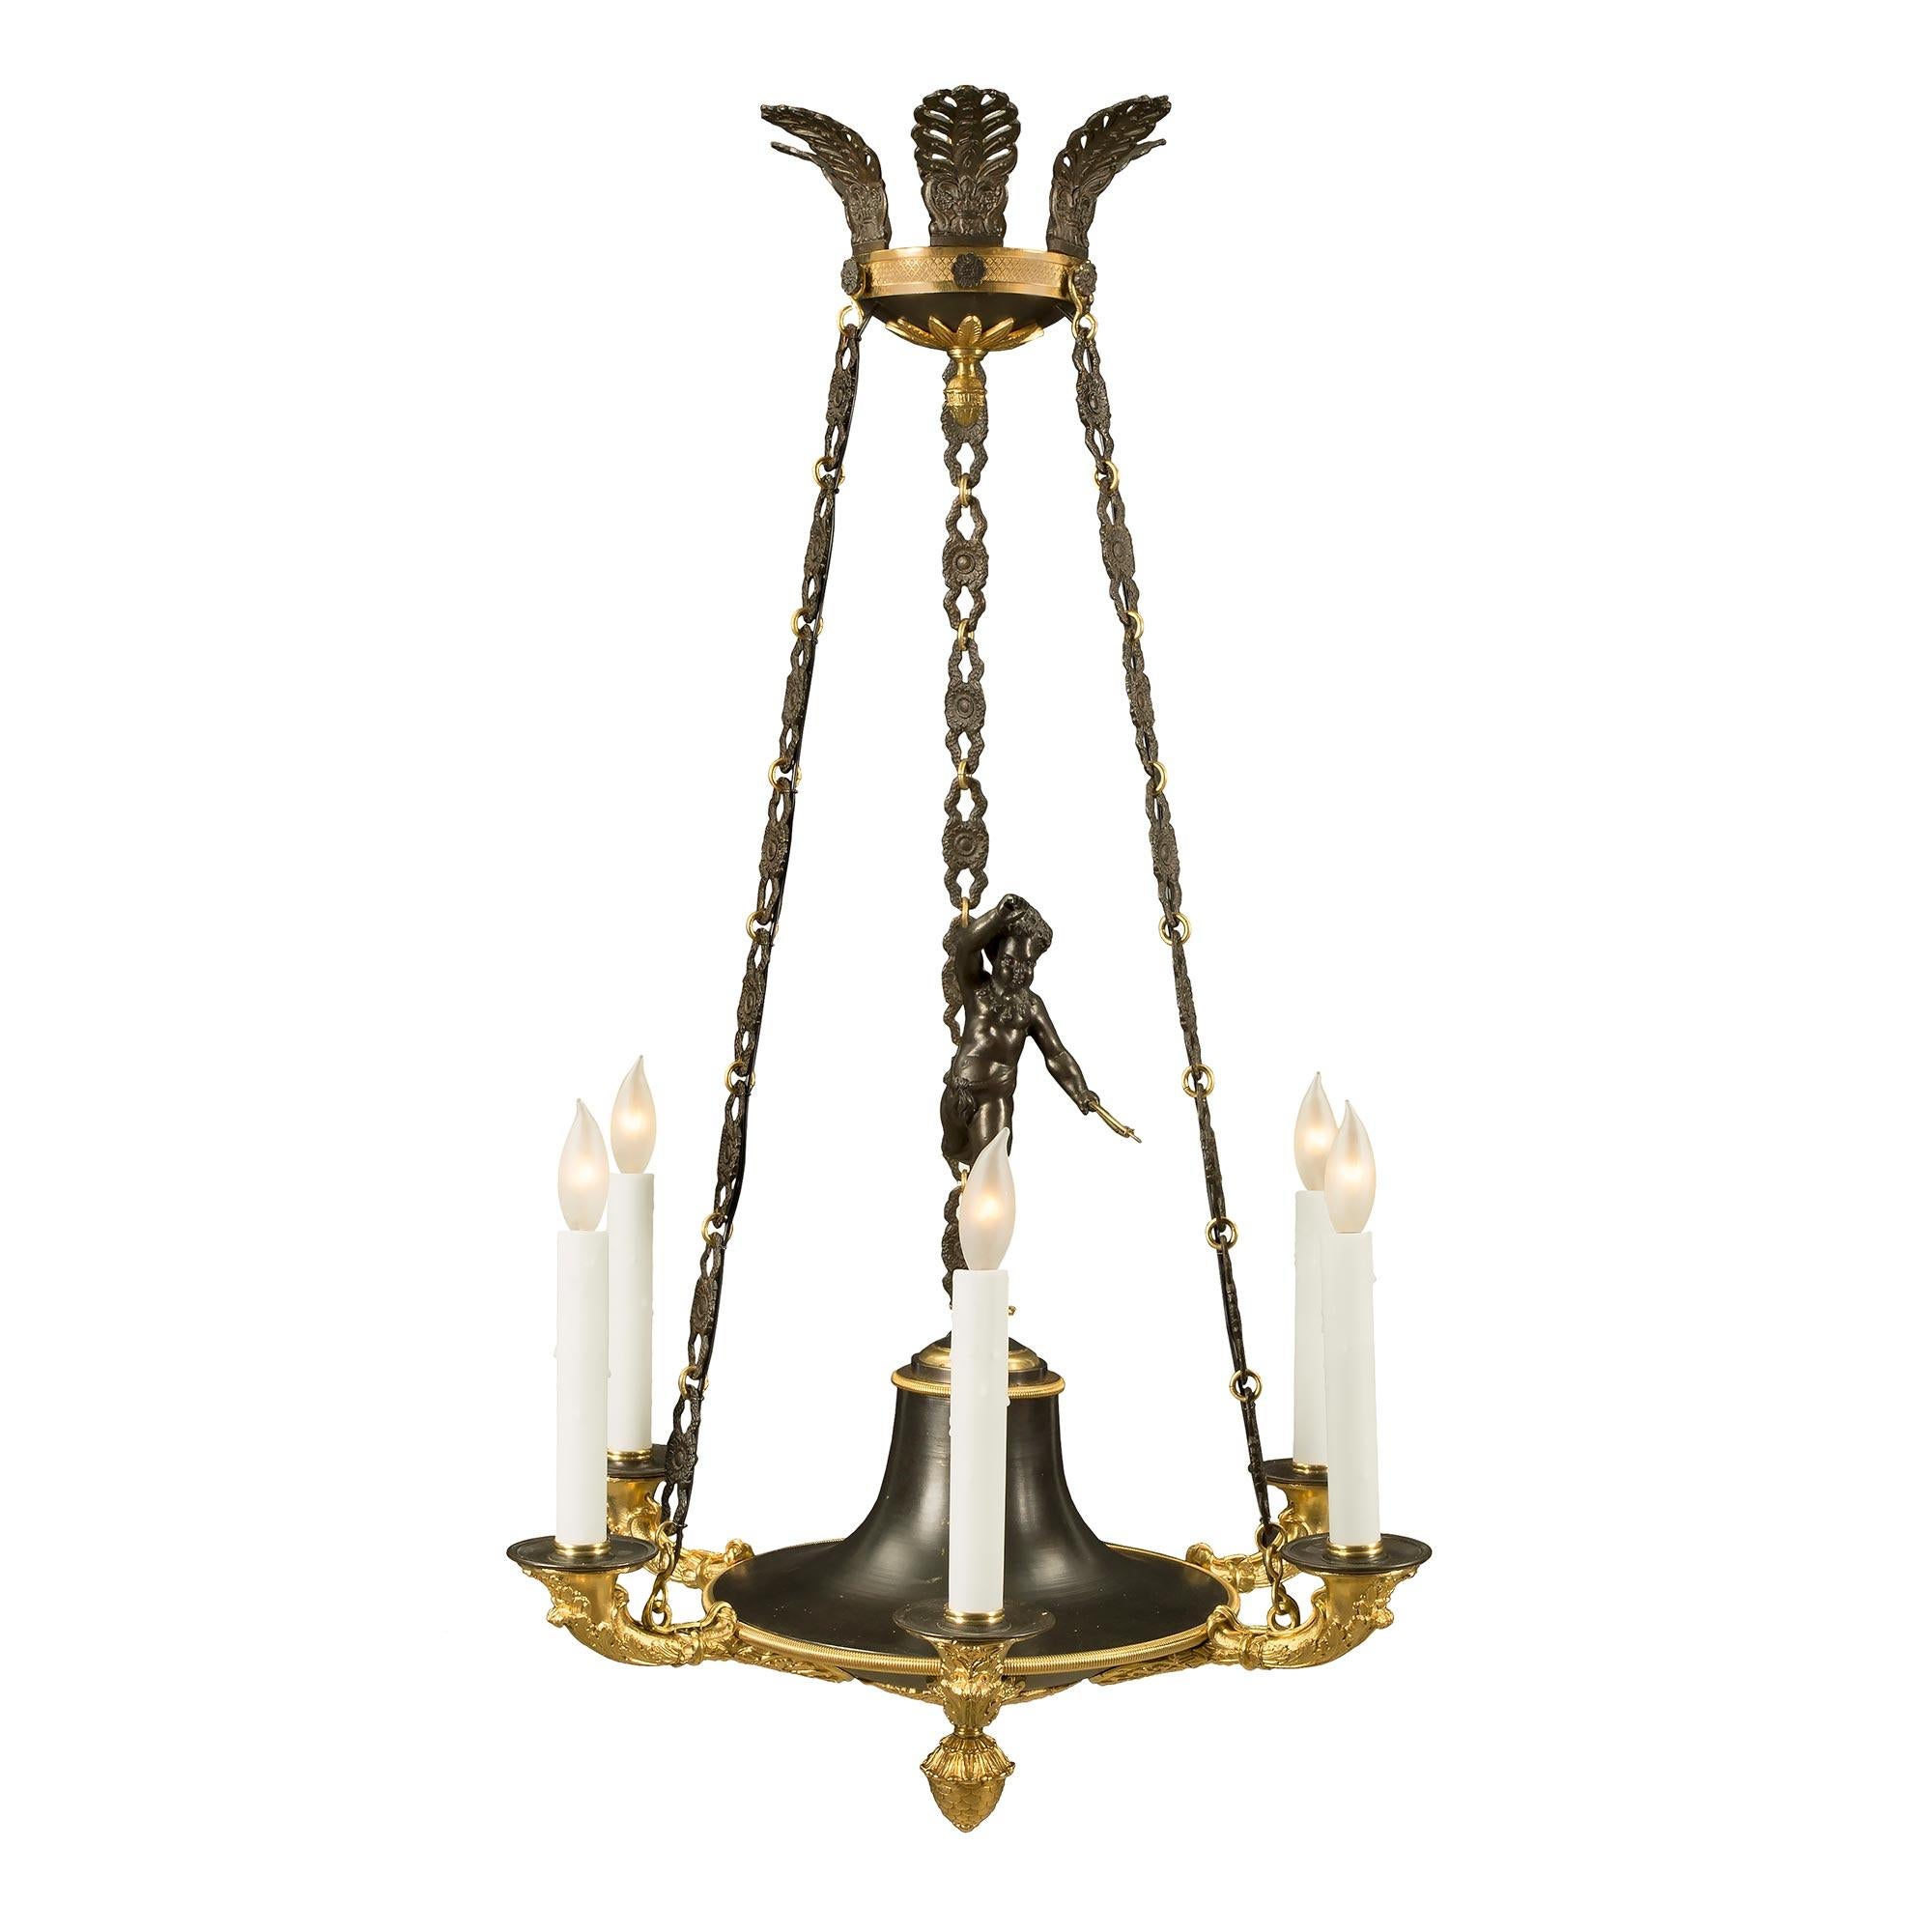 An elegant and most charming French 19th century Neo-Classical st. patinated bronze and ormolu six light chandelier. The chandelier is centered by a lovely bottom ormolu final below the patinated bronze body decorated with lovely foliate movements.